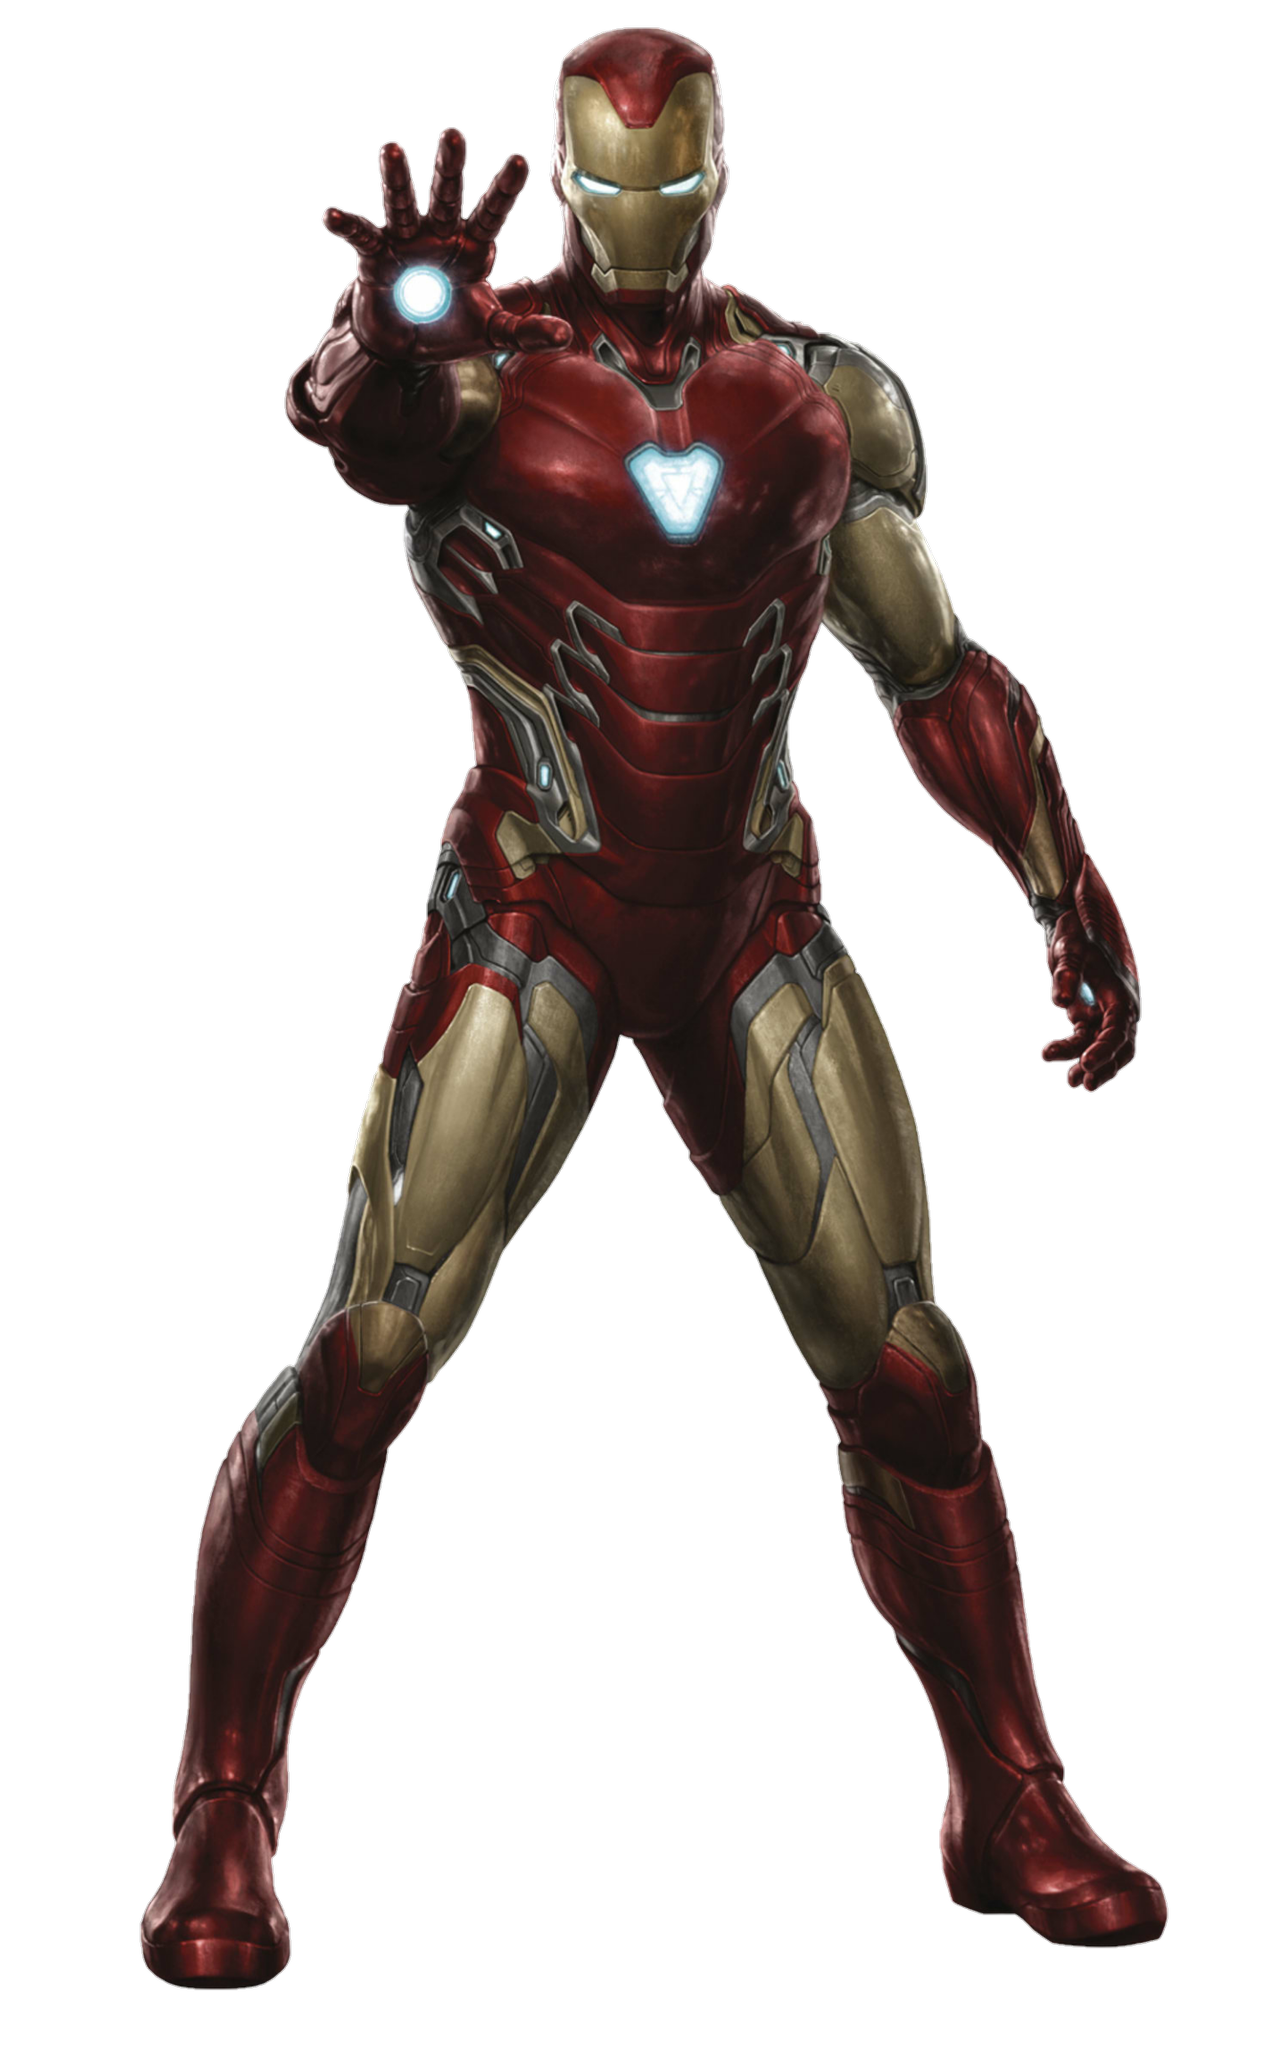 Iron Man Suit - Patent – Get Gifty With It